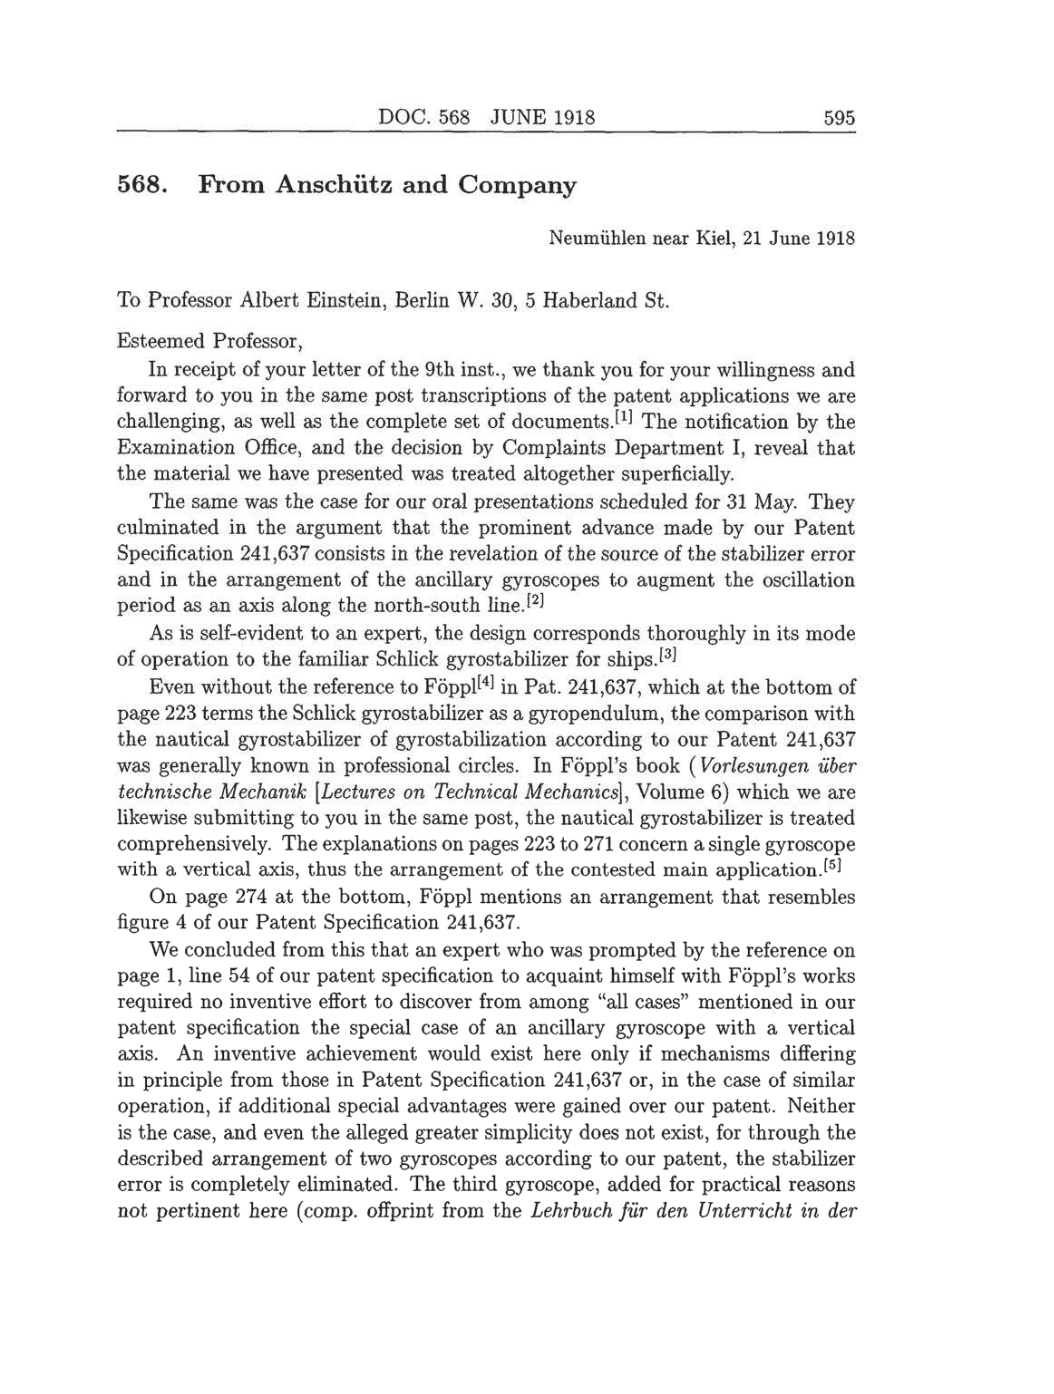 Volume 8: The Berlin Years: Correspondence, 1914-1918 (English translation supplement) page 595